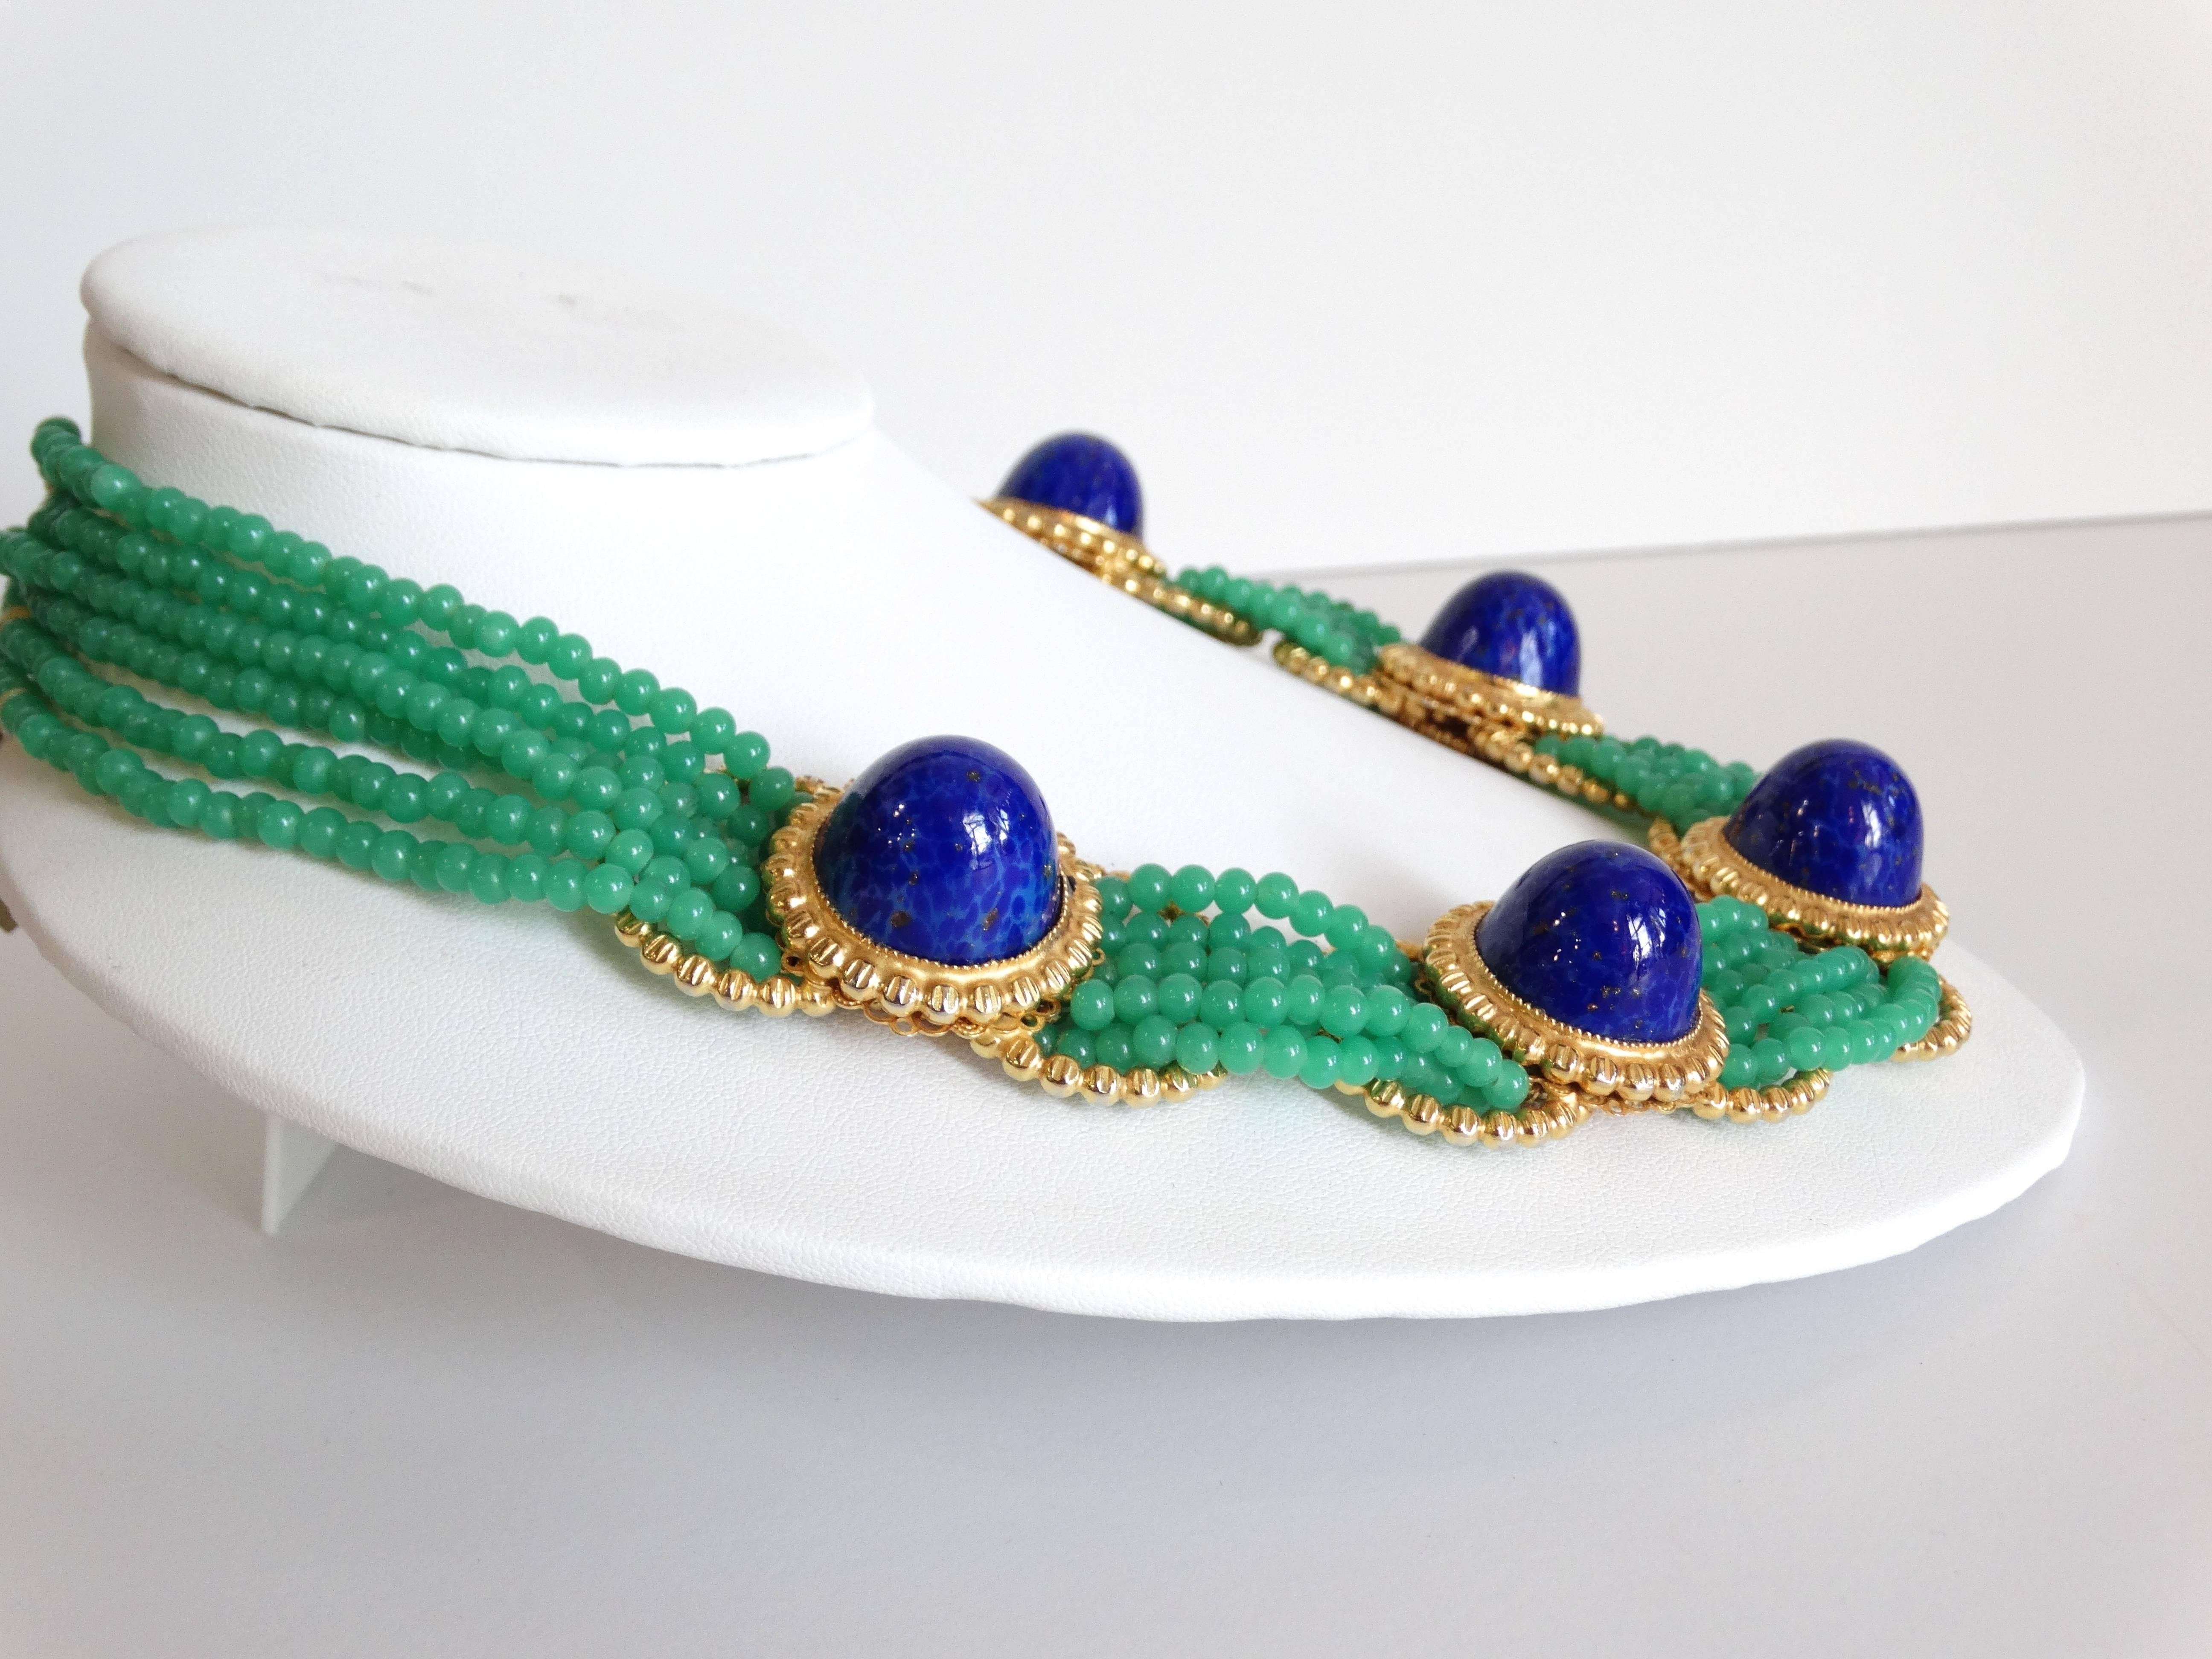 A beautiful collar necklace designed by William de Lillo in 1975. This beautiful collar necklace is designed with five large Lapis Lazuli stones set in a cabochon setting. 6 strands of small jade green cameo glass beads, come together to create this